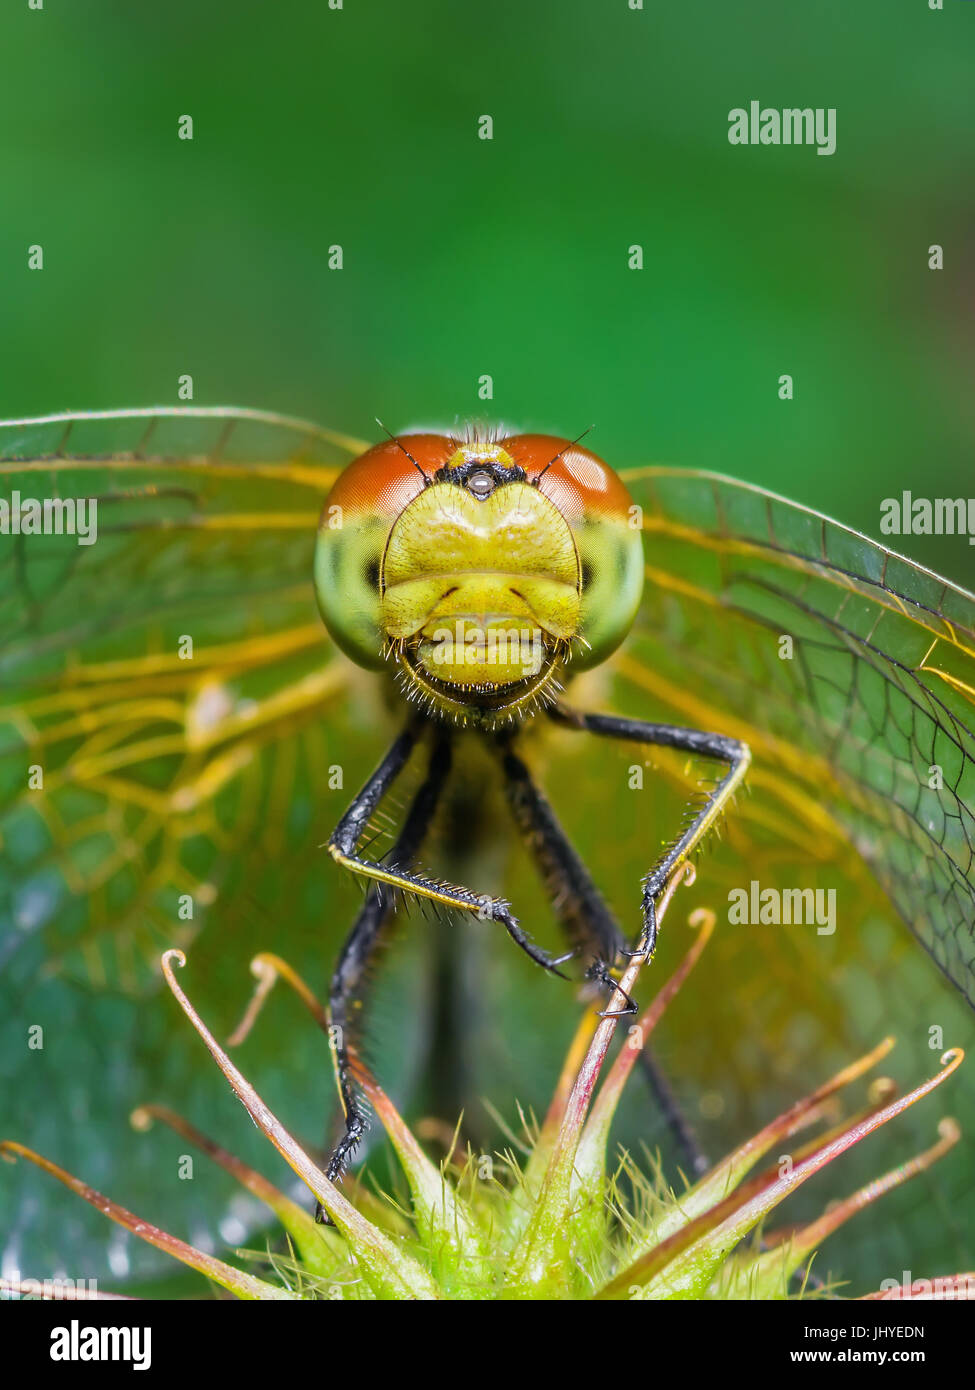 Funny Smiling Dragonfly Portrait Stock Photo